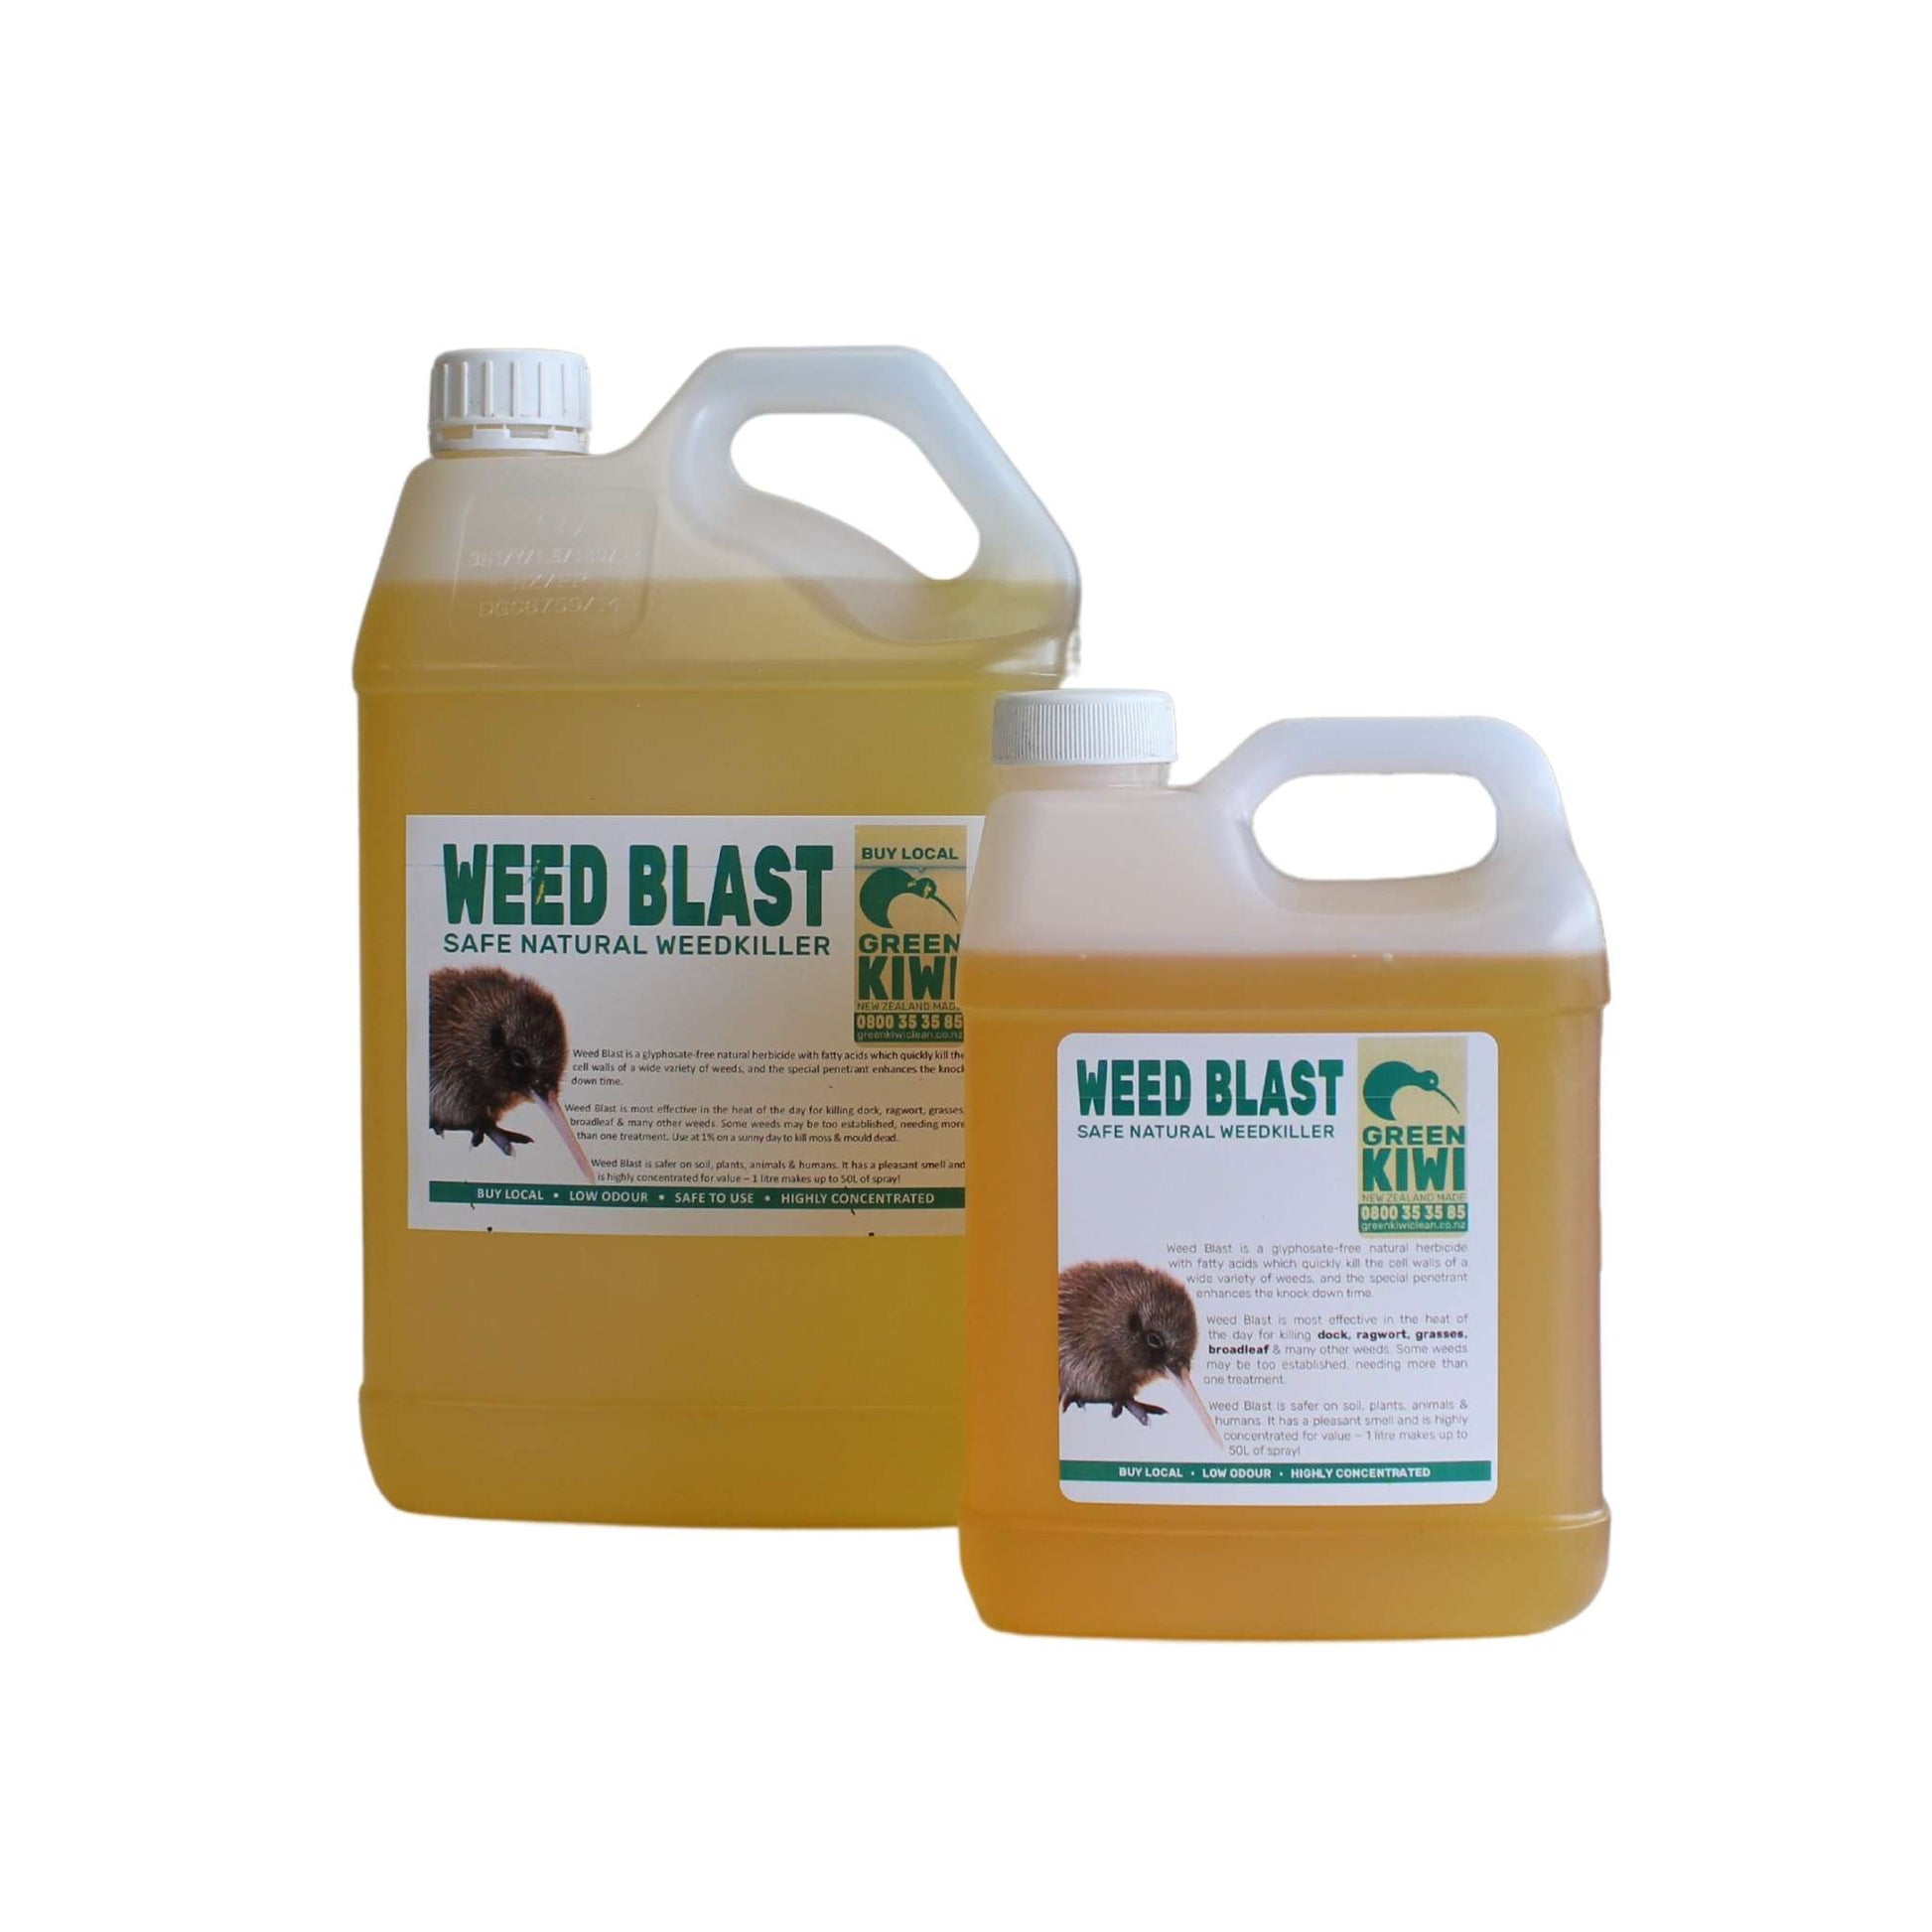 Weed Blast natural weedkiller concentrate